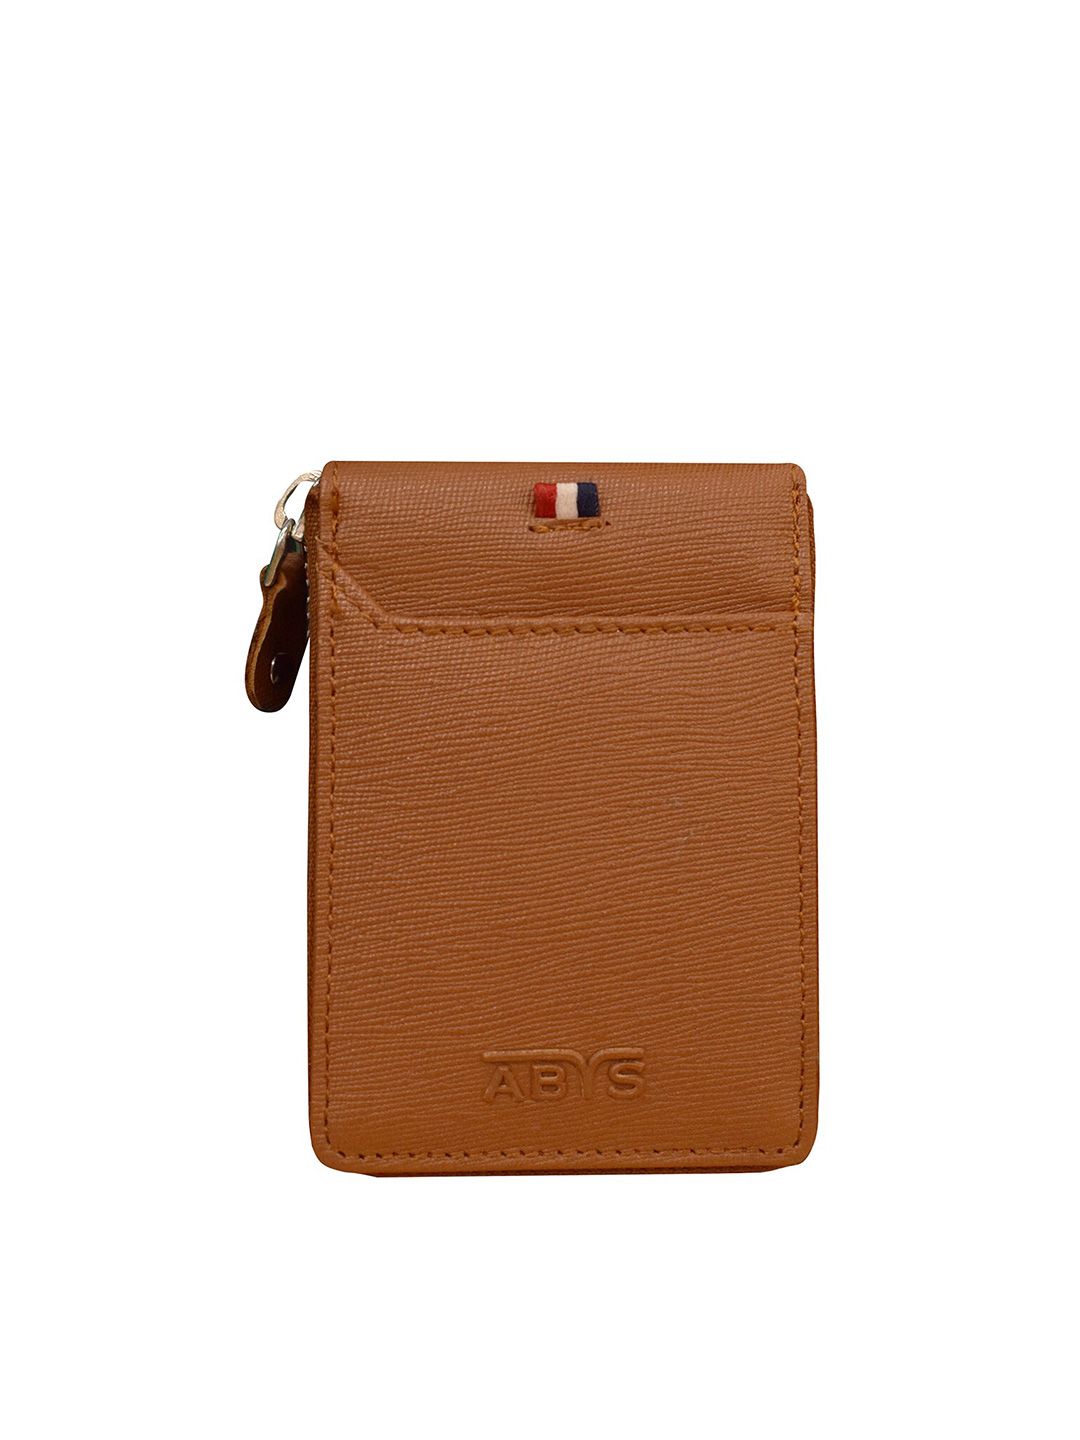 ABYS Unisex Tan & Gunmetal-Toned Textured Leather Card Holder Price in India